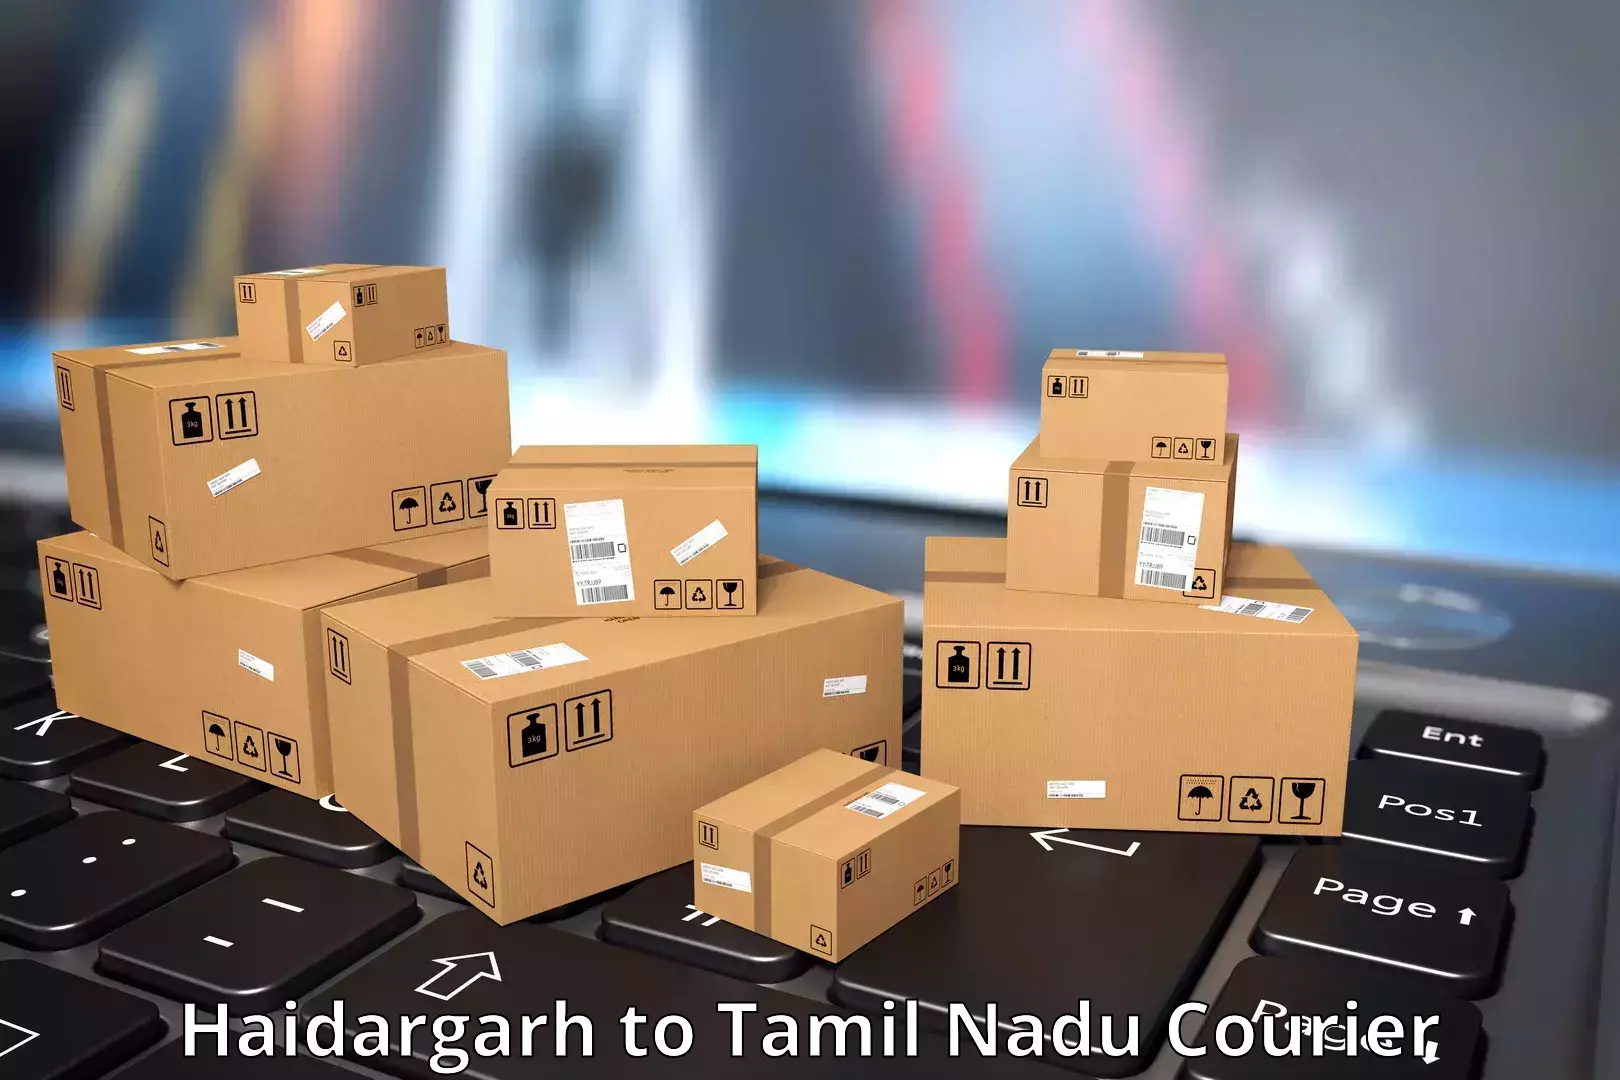 Versatile courier options Haidargarh to Vellore Institute of Technology